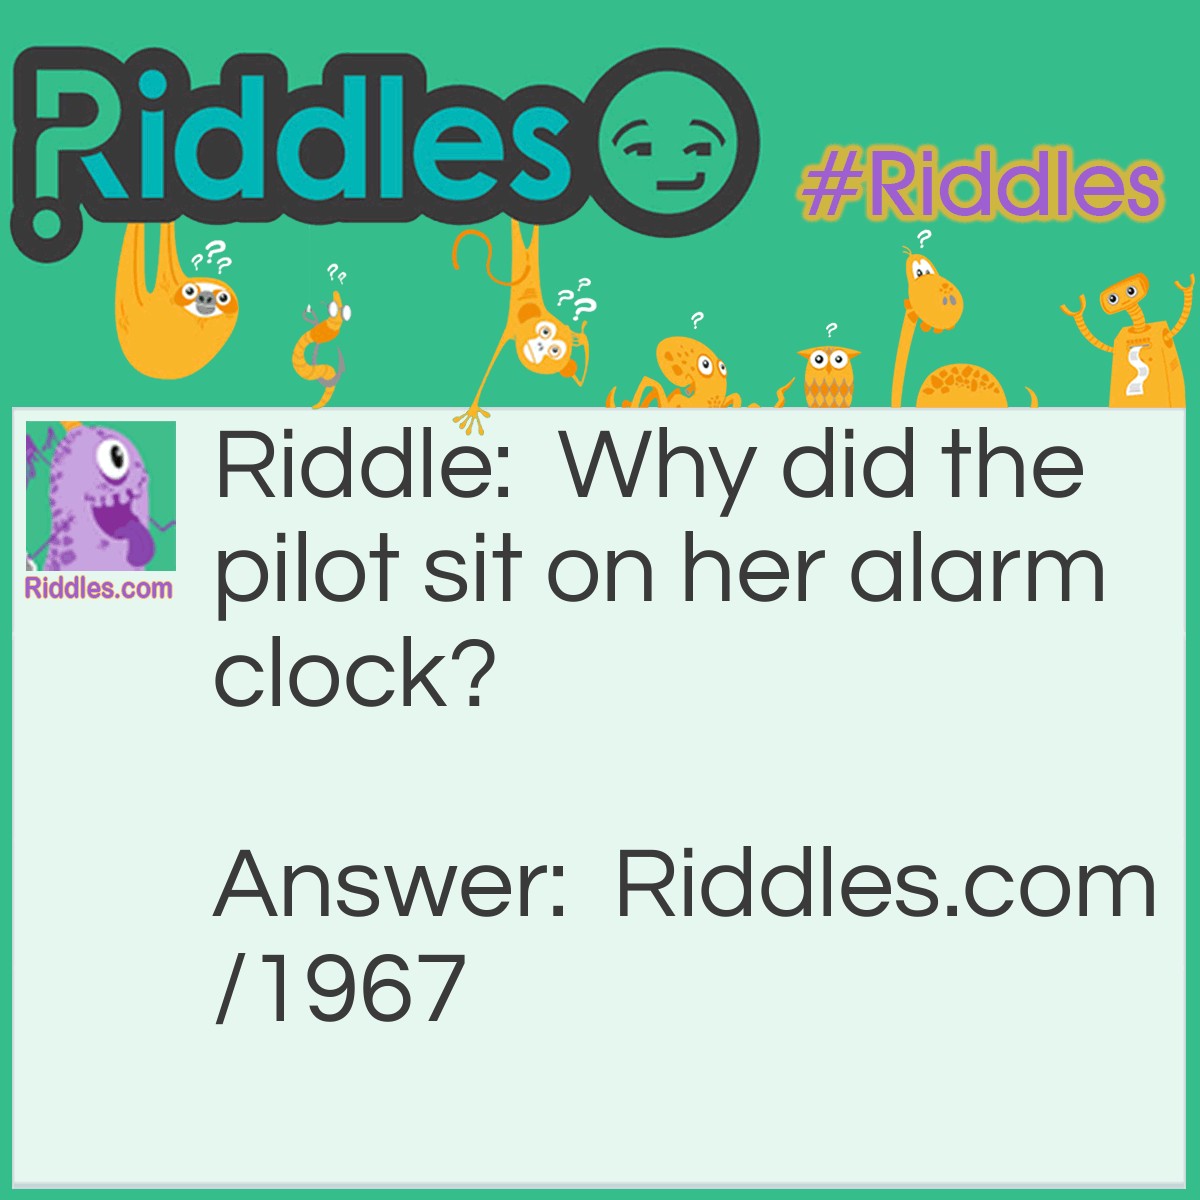 Riddle: Why did the pilot sit on her alarm clock? Answer: She wanted to be on time.